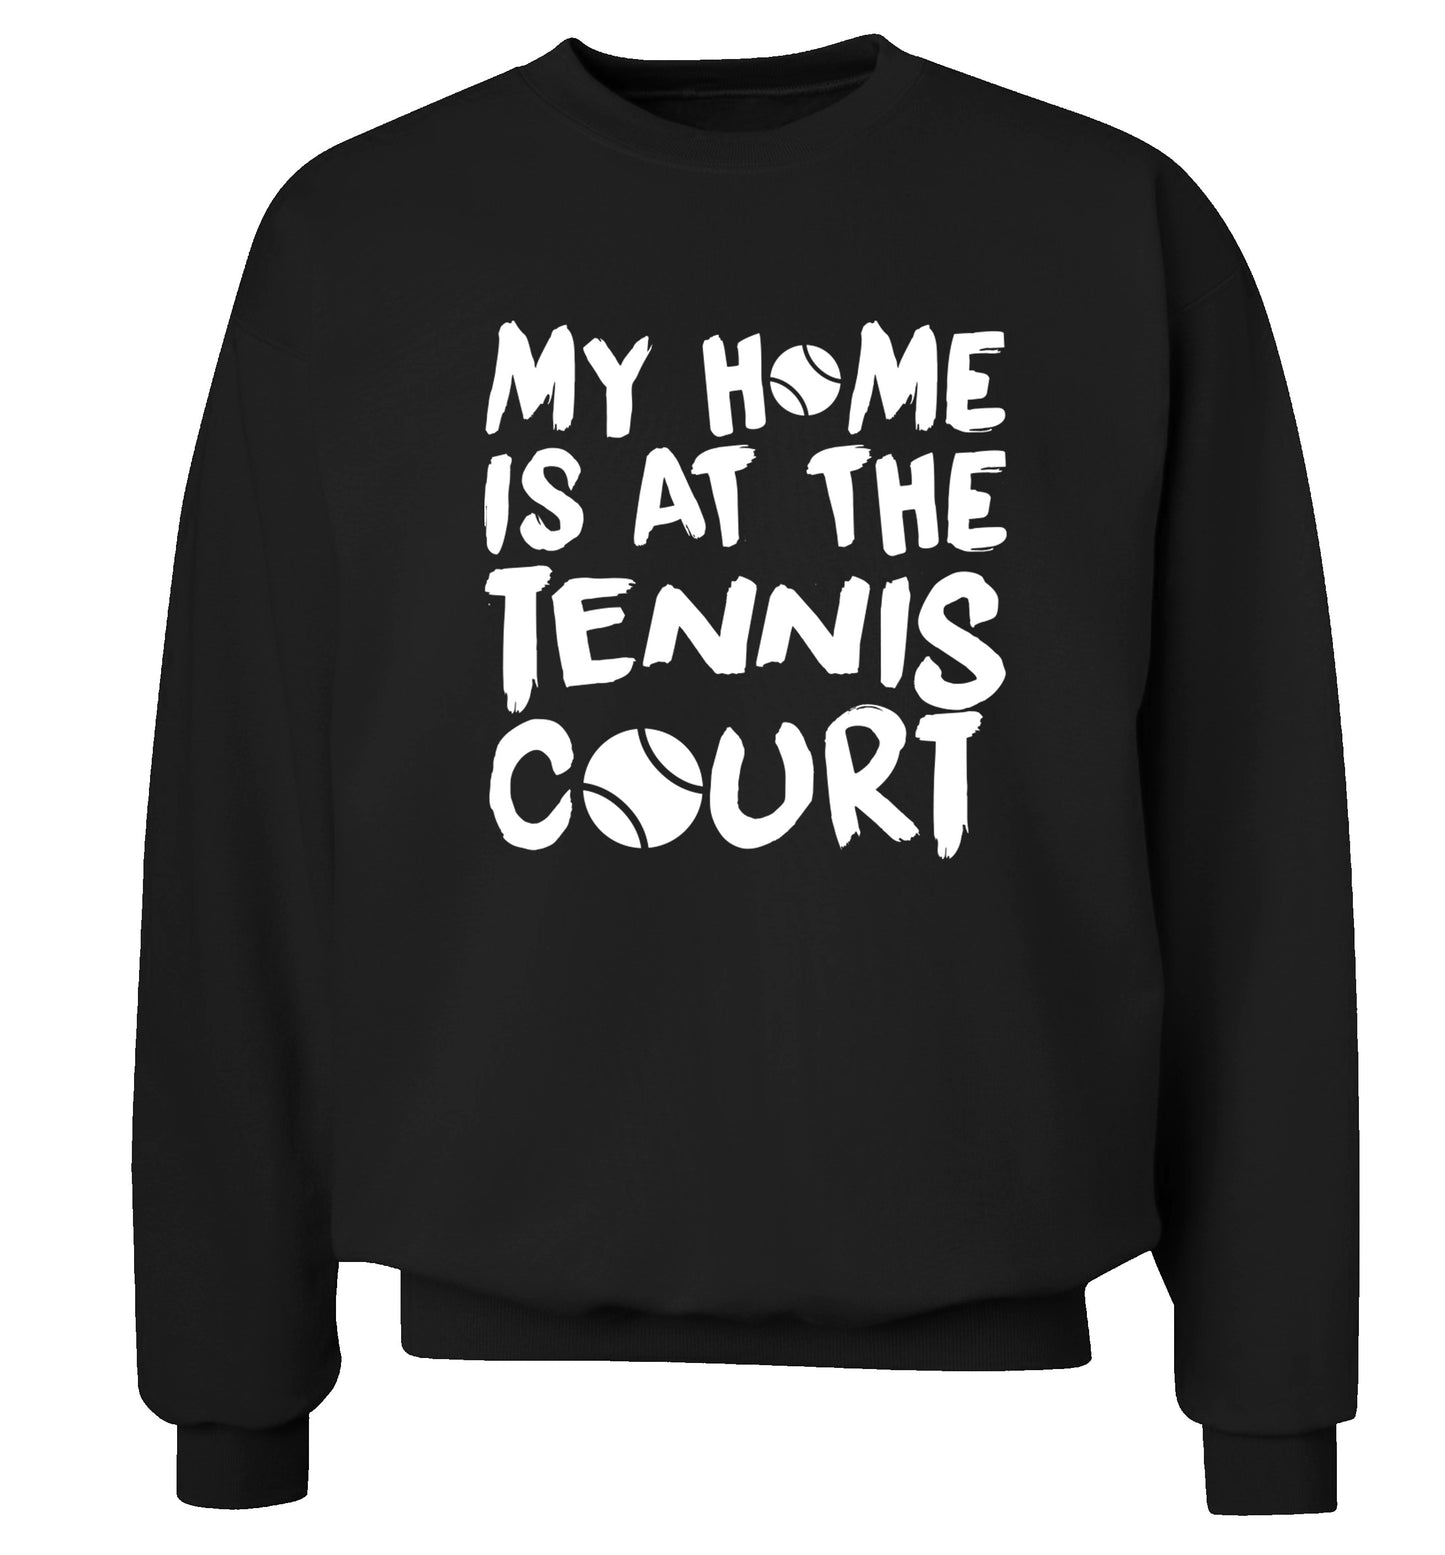 My home is at the tennis court Adult's unisex black Sweater 2XL